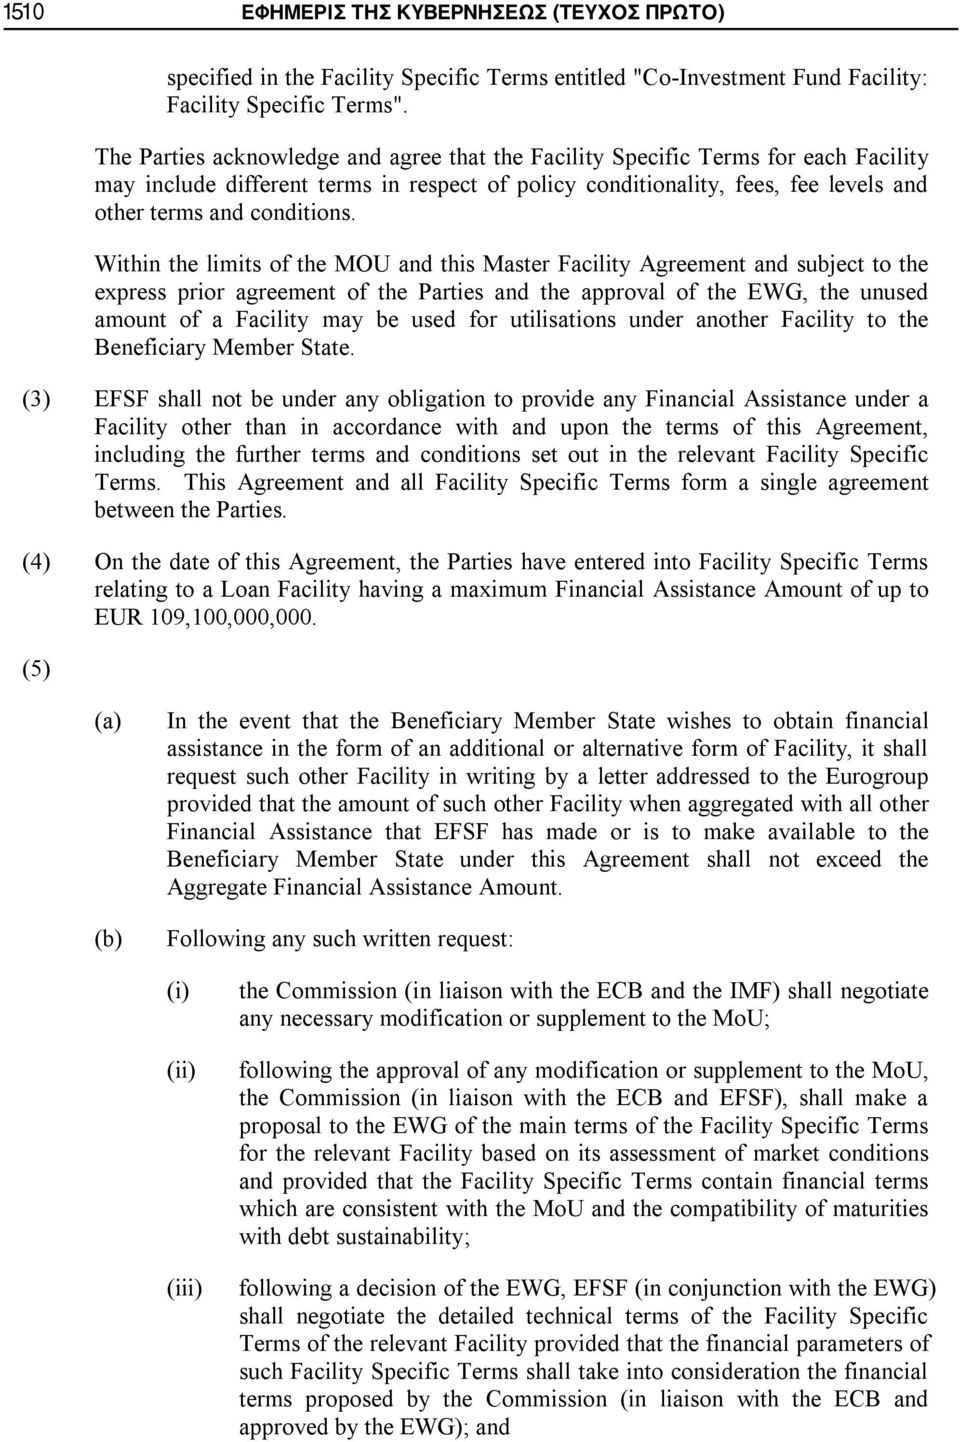 Within the limits of the MOU and this Master Facility Agreement and subject to the express prior agreement of the Parties and the approval of the EWG, the unused amount of a Facility may be used for